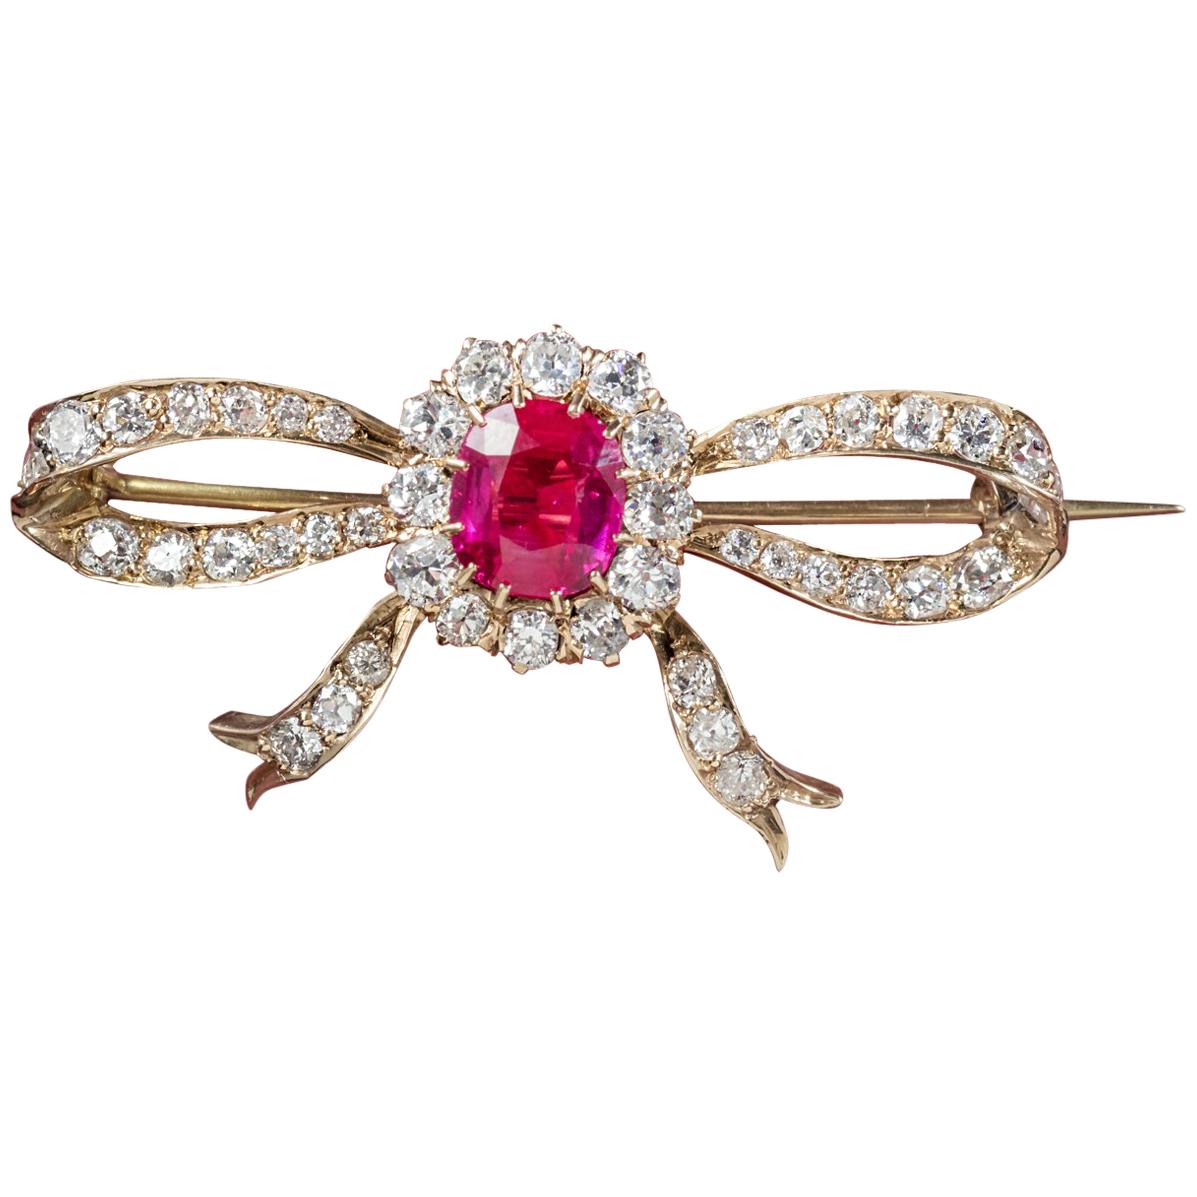 Antique Edwardian Diamond Verneuil Ruby 18 Carat Gold circa 1910 Brooch For Sale